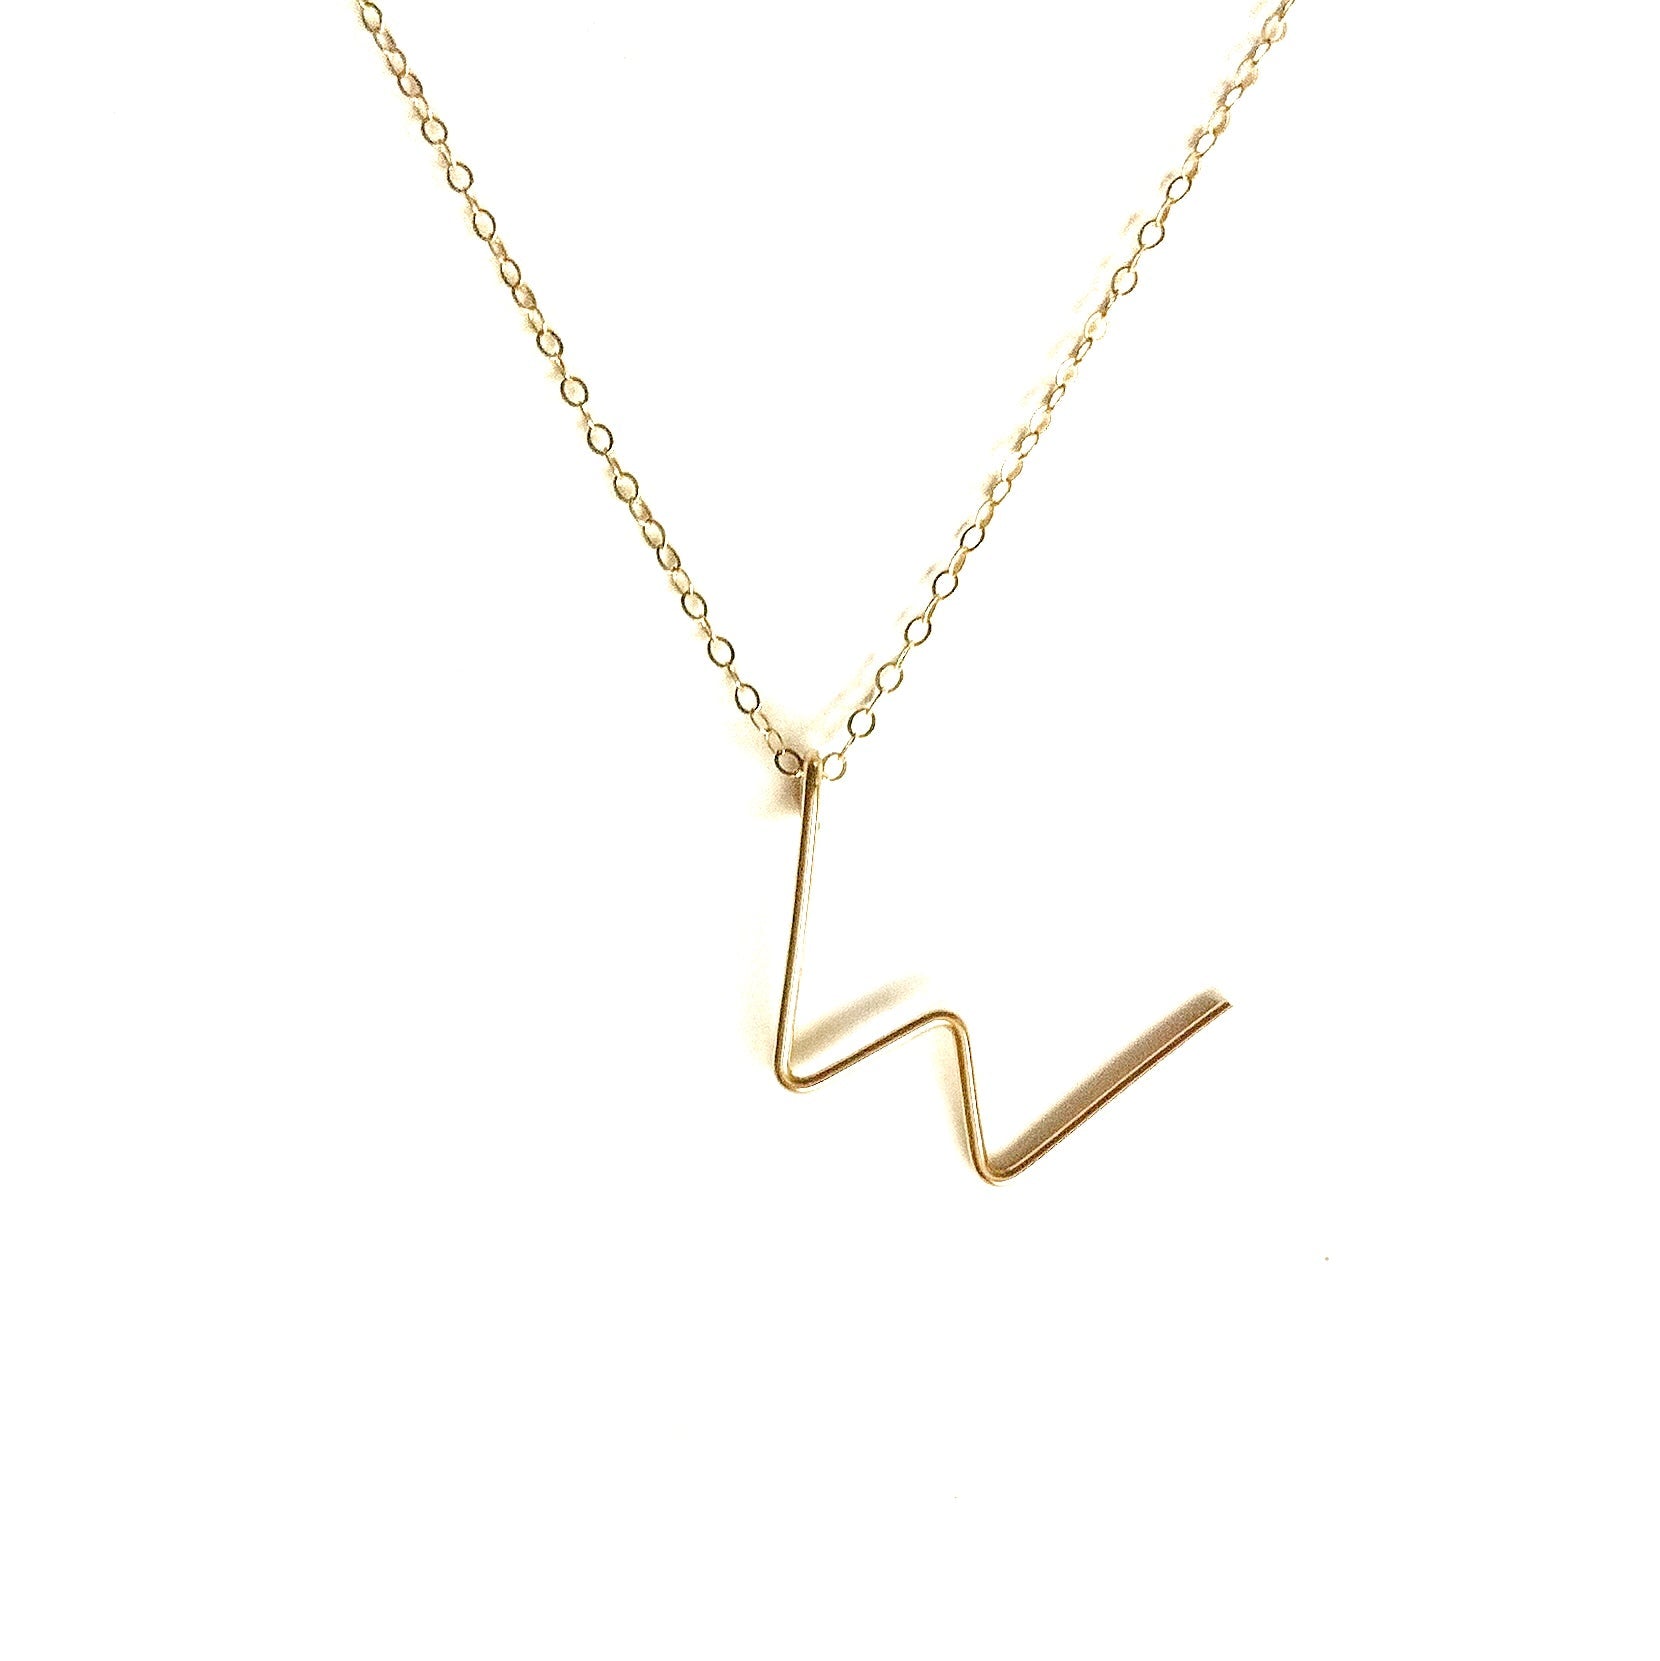 Handmade Initial Necklace Robyn Canady w 14K Gold Filled 